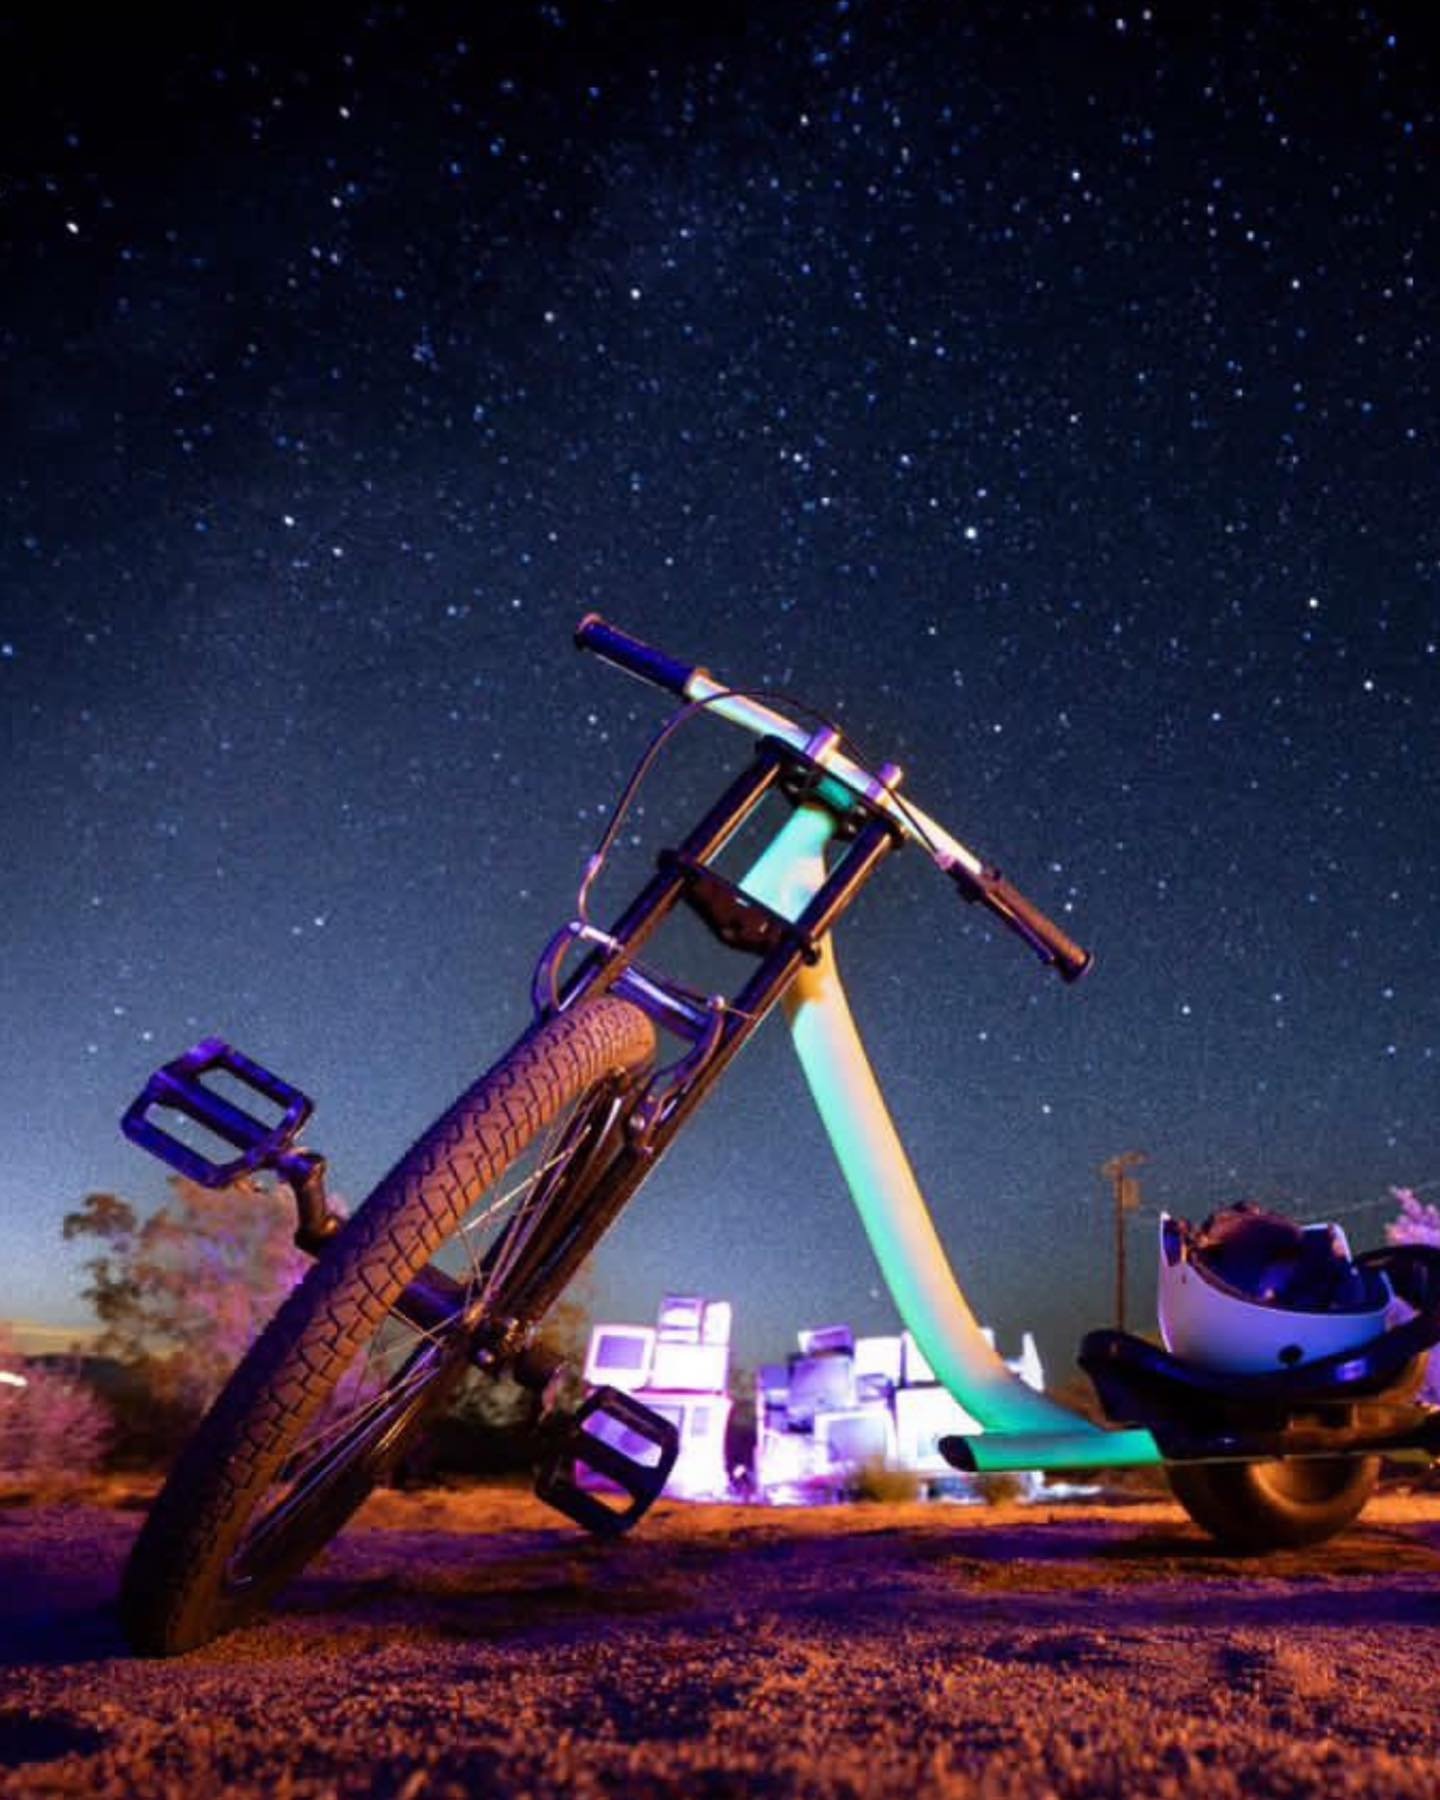 night ride (pic taken by a recent guest @vp_lights 😍)

#travel #vacation #star #90s #nostalgia #airbnb